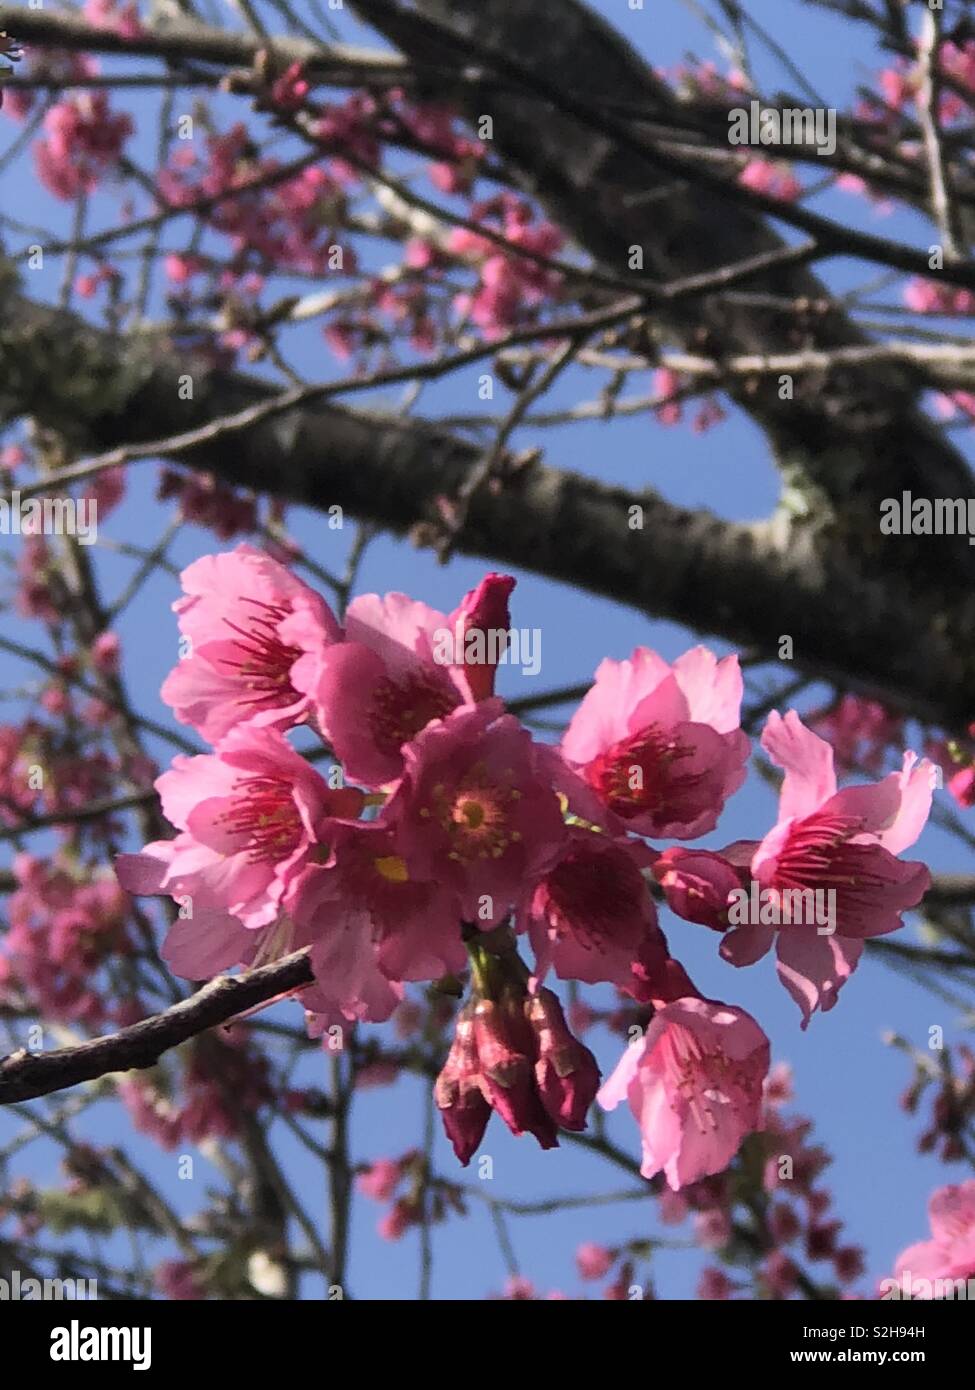 Cherry Blossoms in bloom at the Waimea Cherry Blossom festival on the